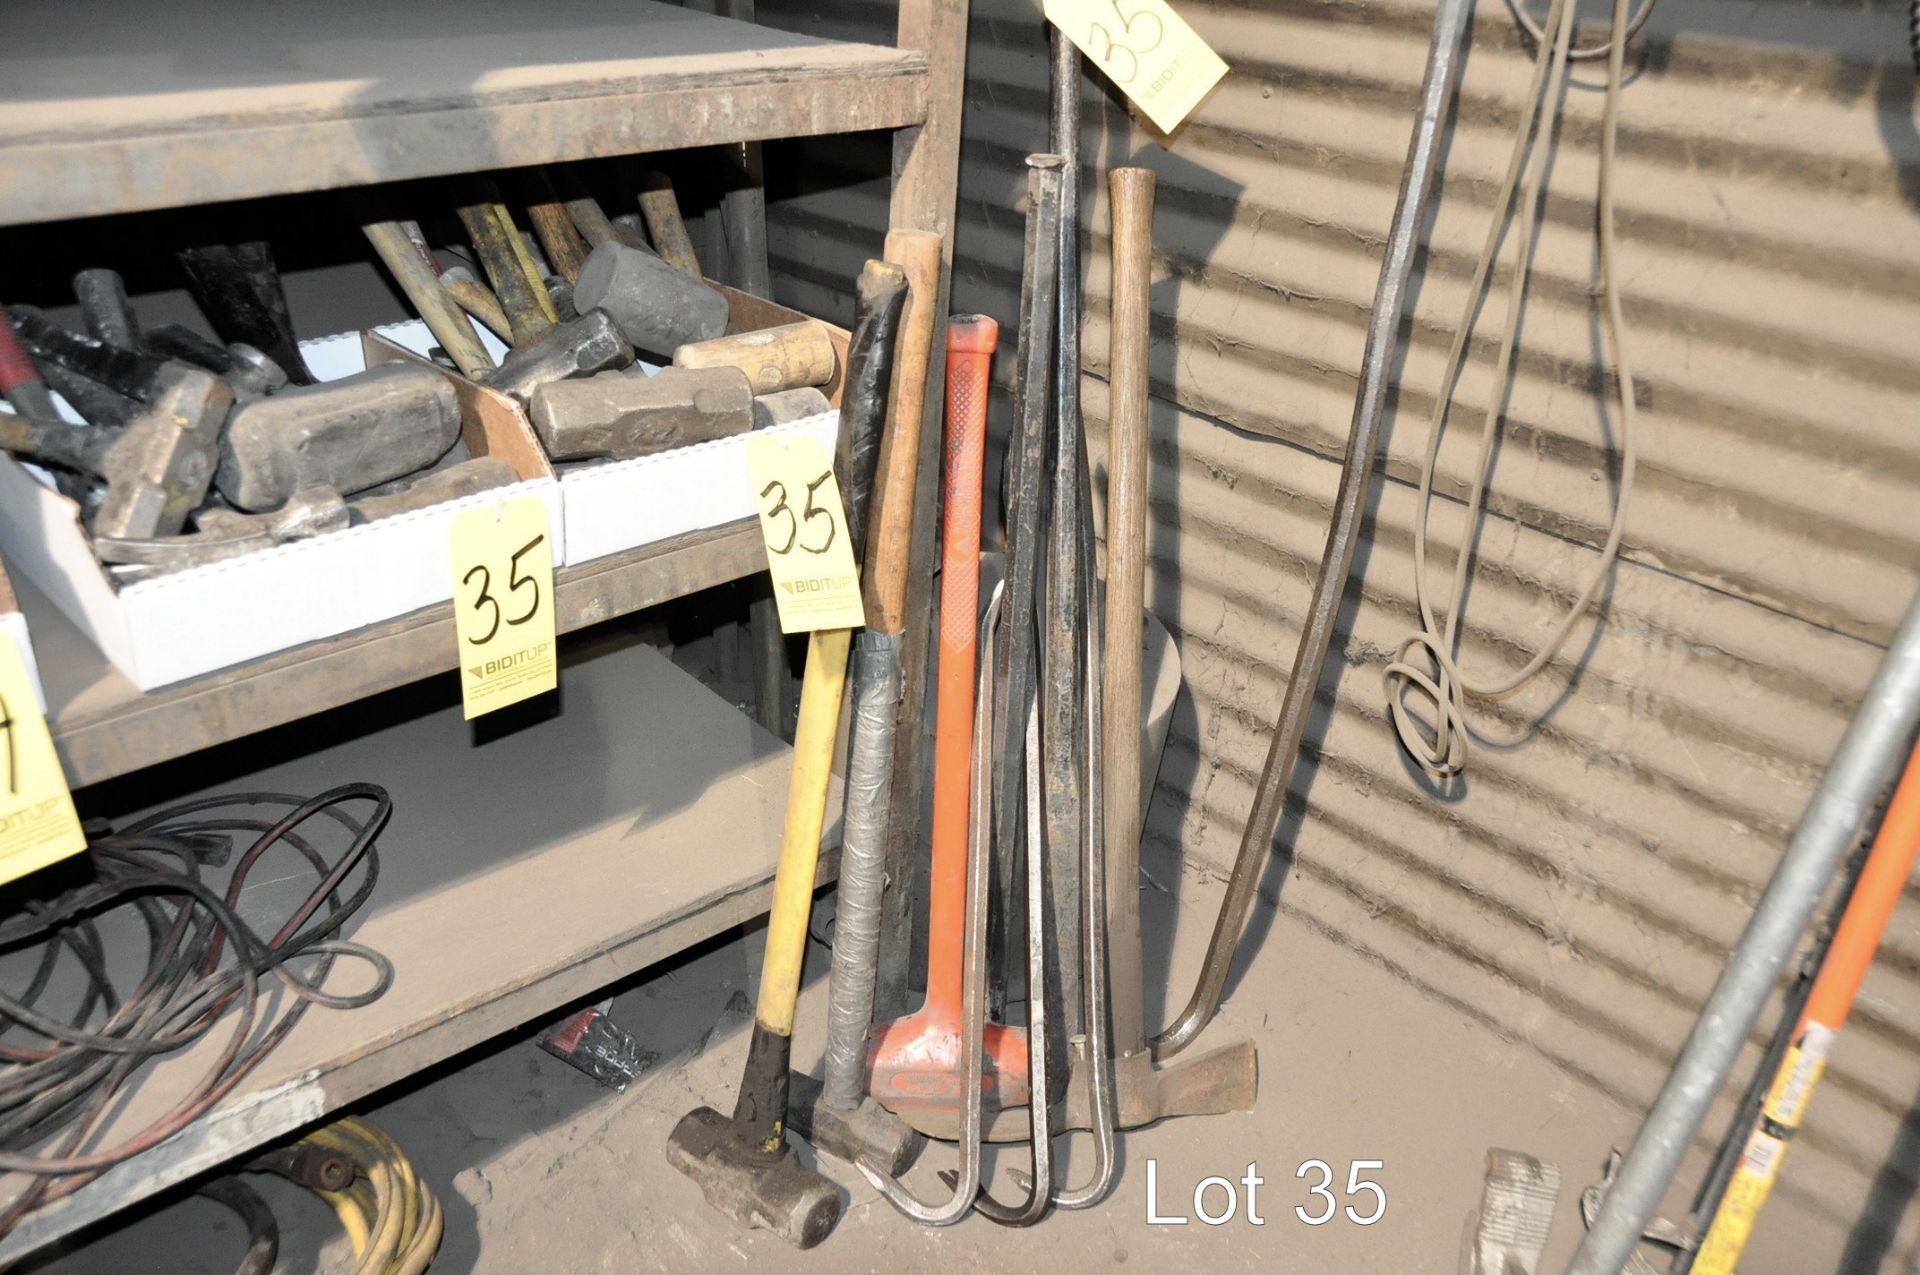 Lot-Asst'd Hammers, Sledge Hammers, Pick and Pry Bars - Image 2 of 2